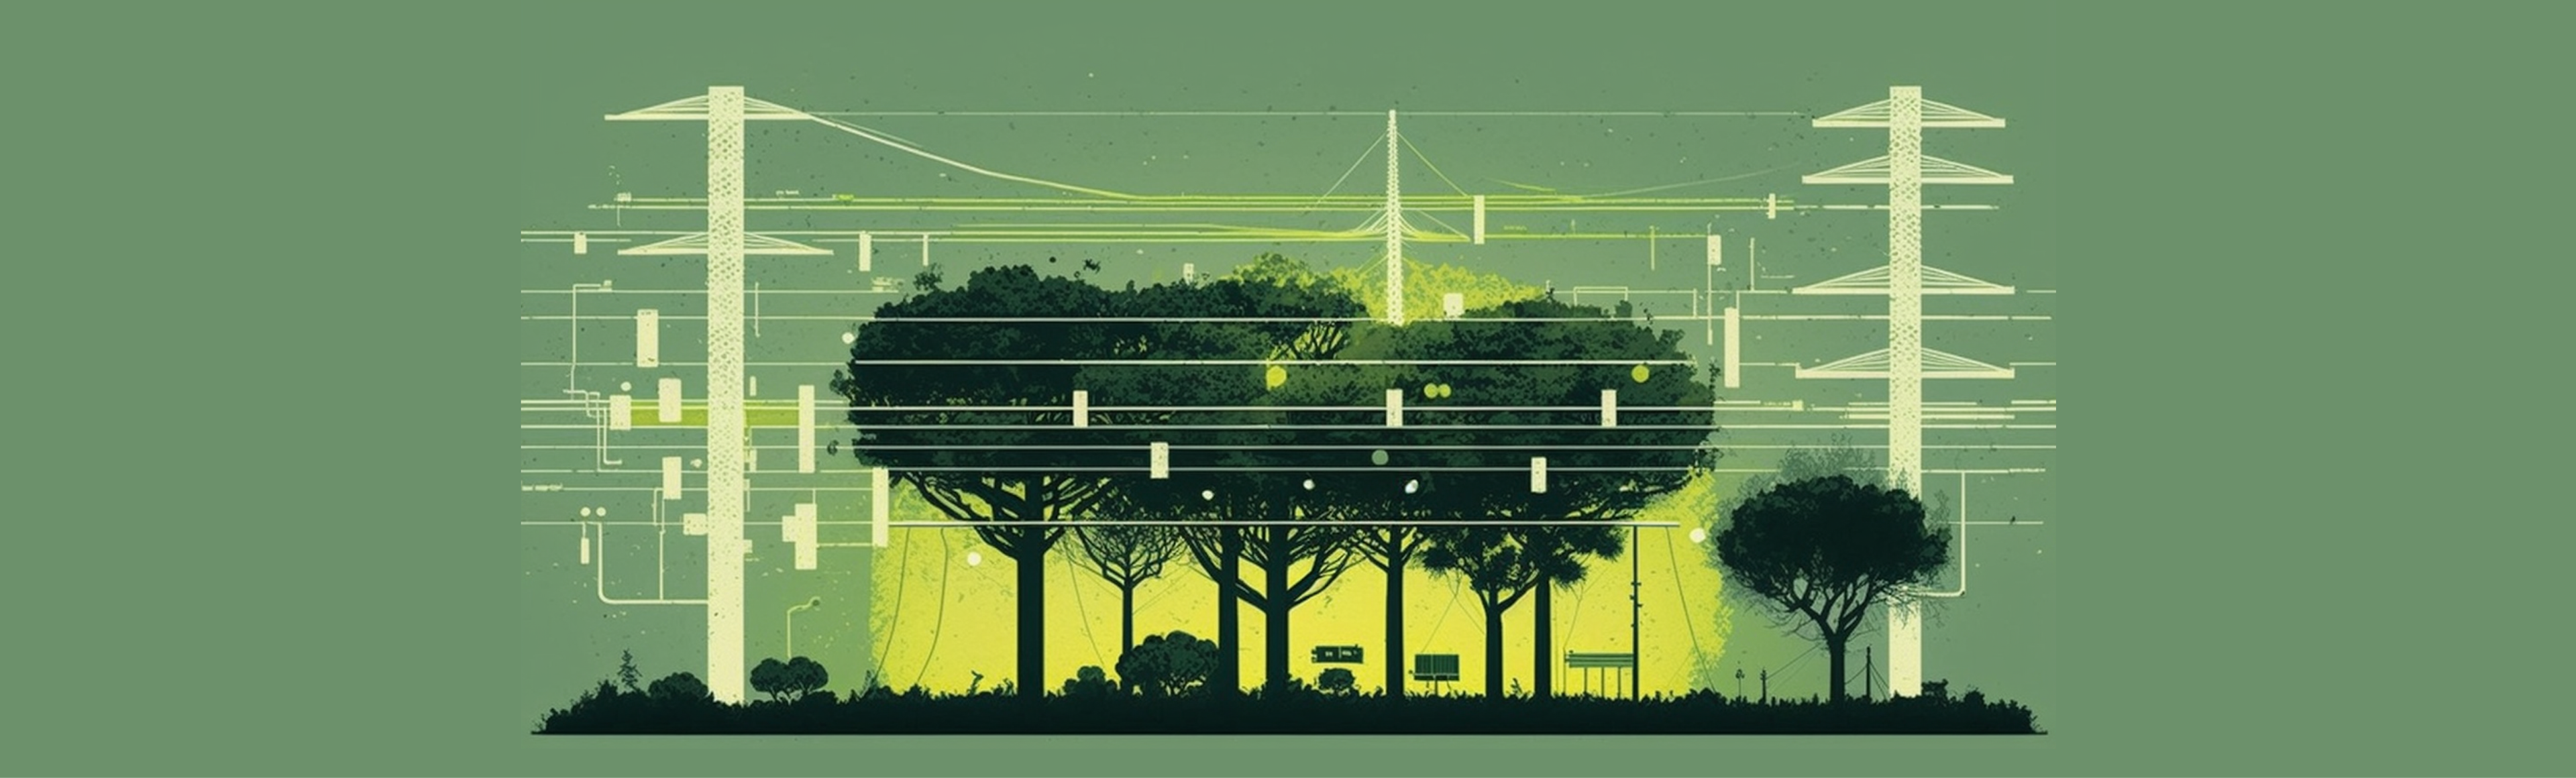 An illustration of trees infused with technological elements.